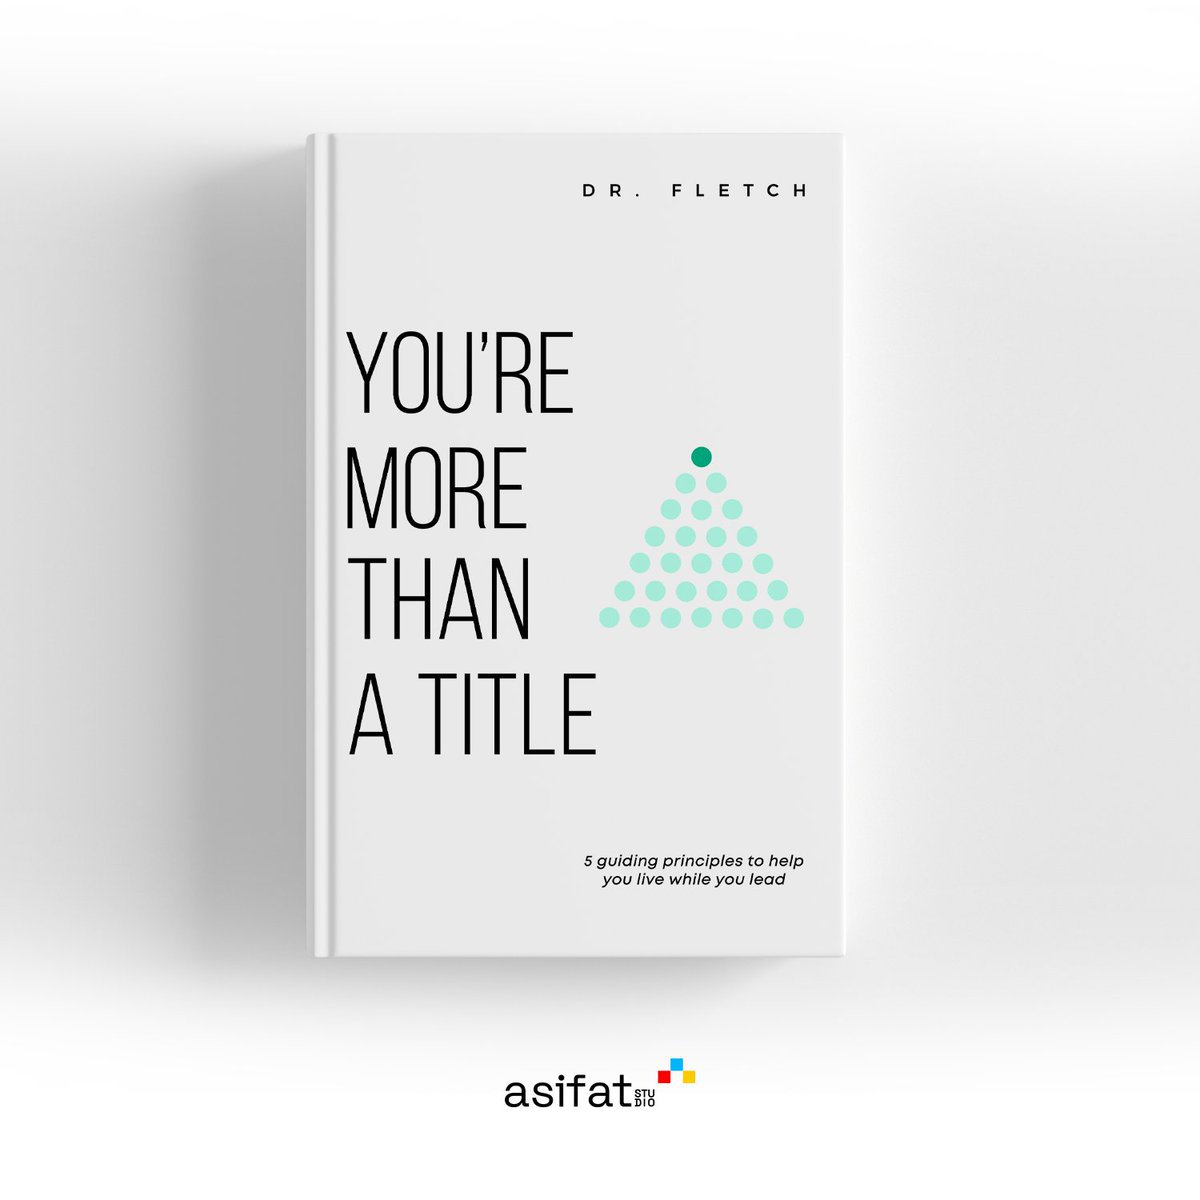 You're More Than A Little By Dr. Fletch #bookcoverdesign #bookcover #WriterCommunity #bookcovers  #WritingCommunity #selfpublishing #booklover #indieauthor #premadebookcover #author #ebookcoverdesign #writersoftwitter #ebookcover #bookdesigner #ebook #selfpub #asifatstudio